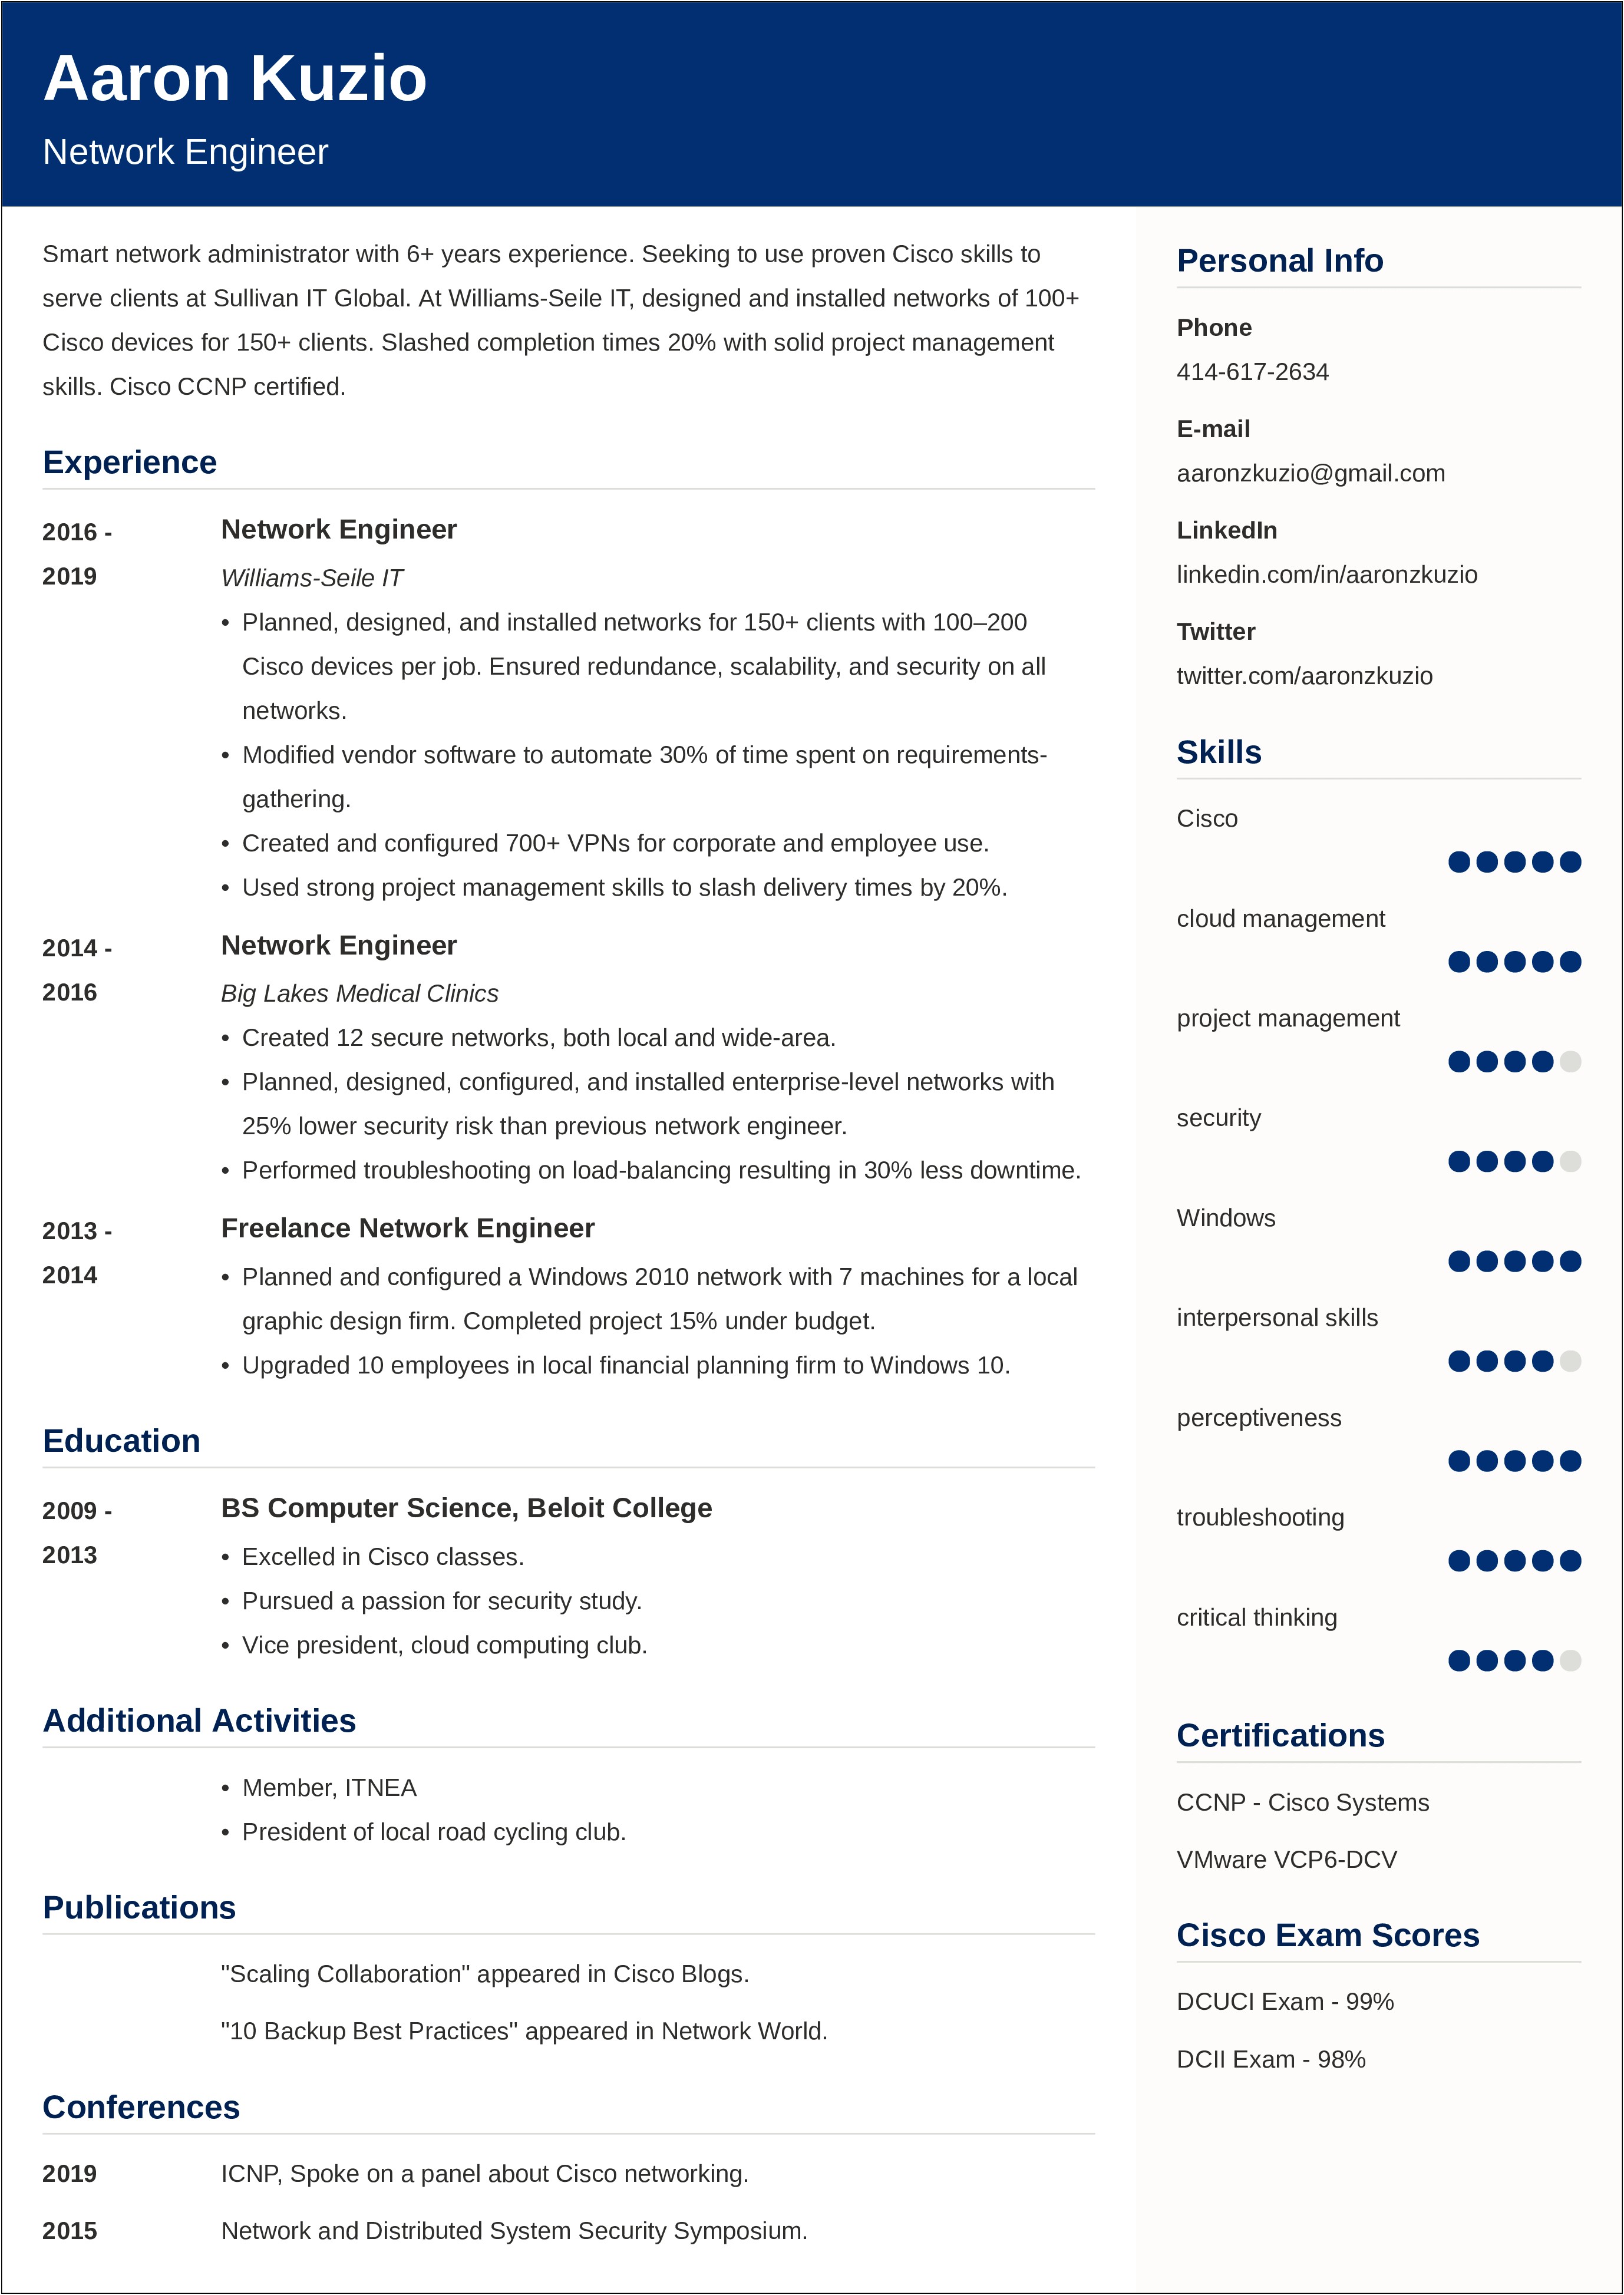 Difference Between Learned And Acquired Skills On Resume